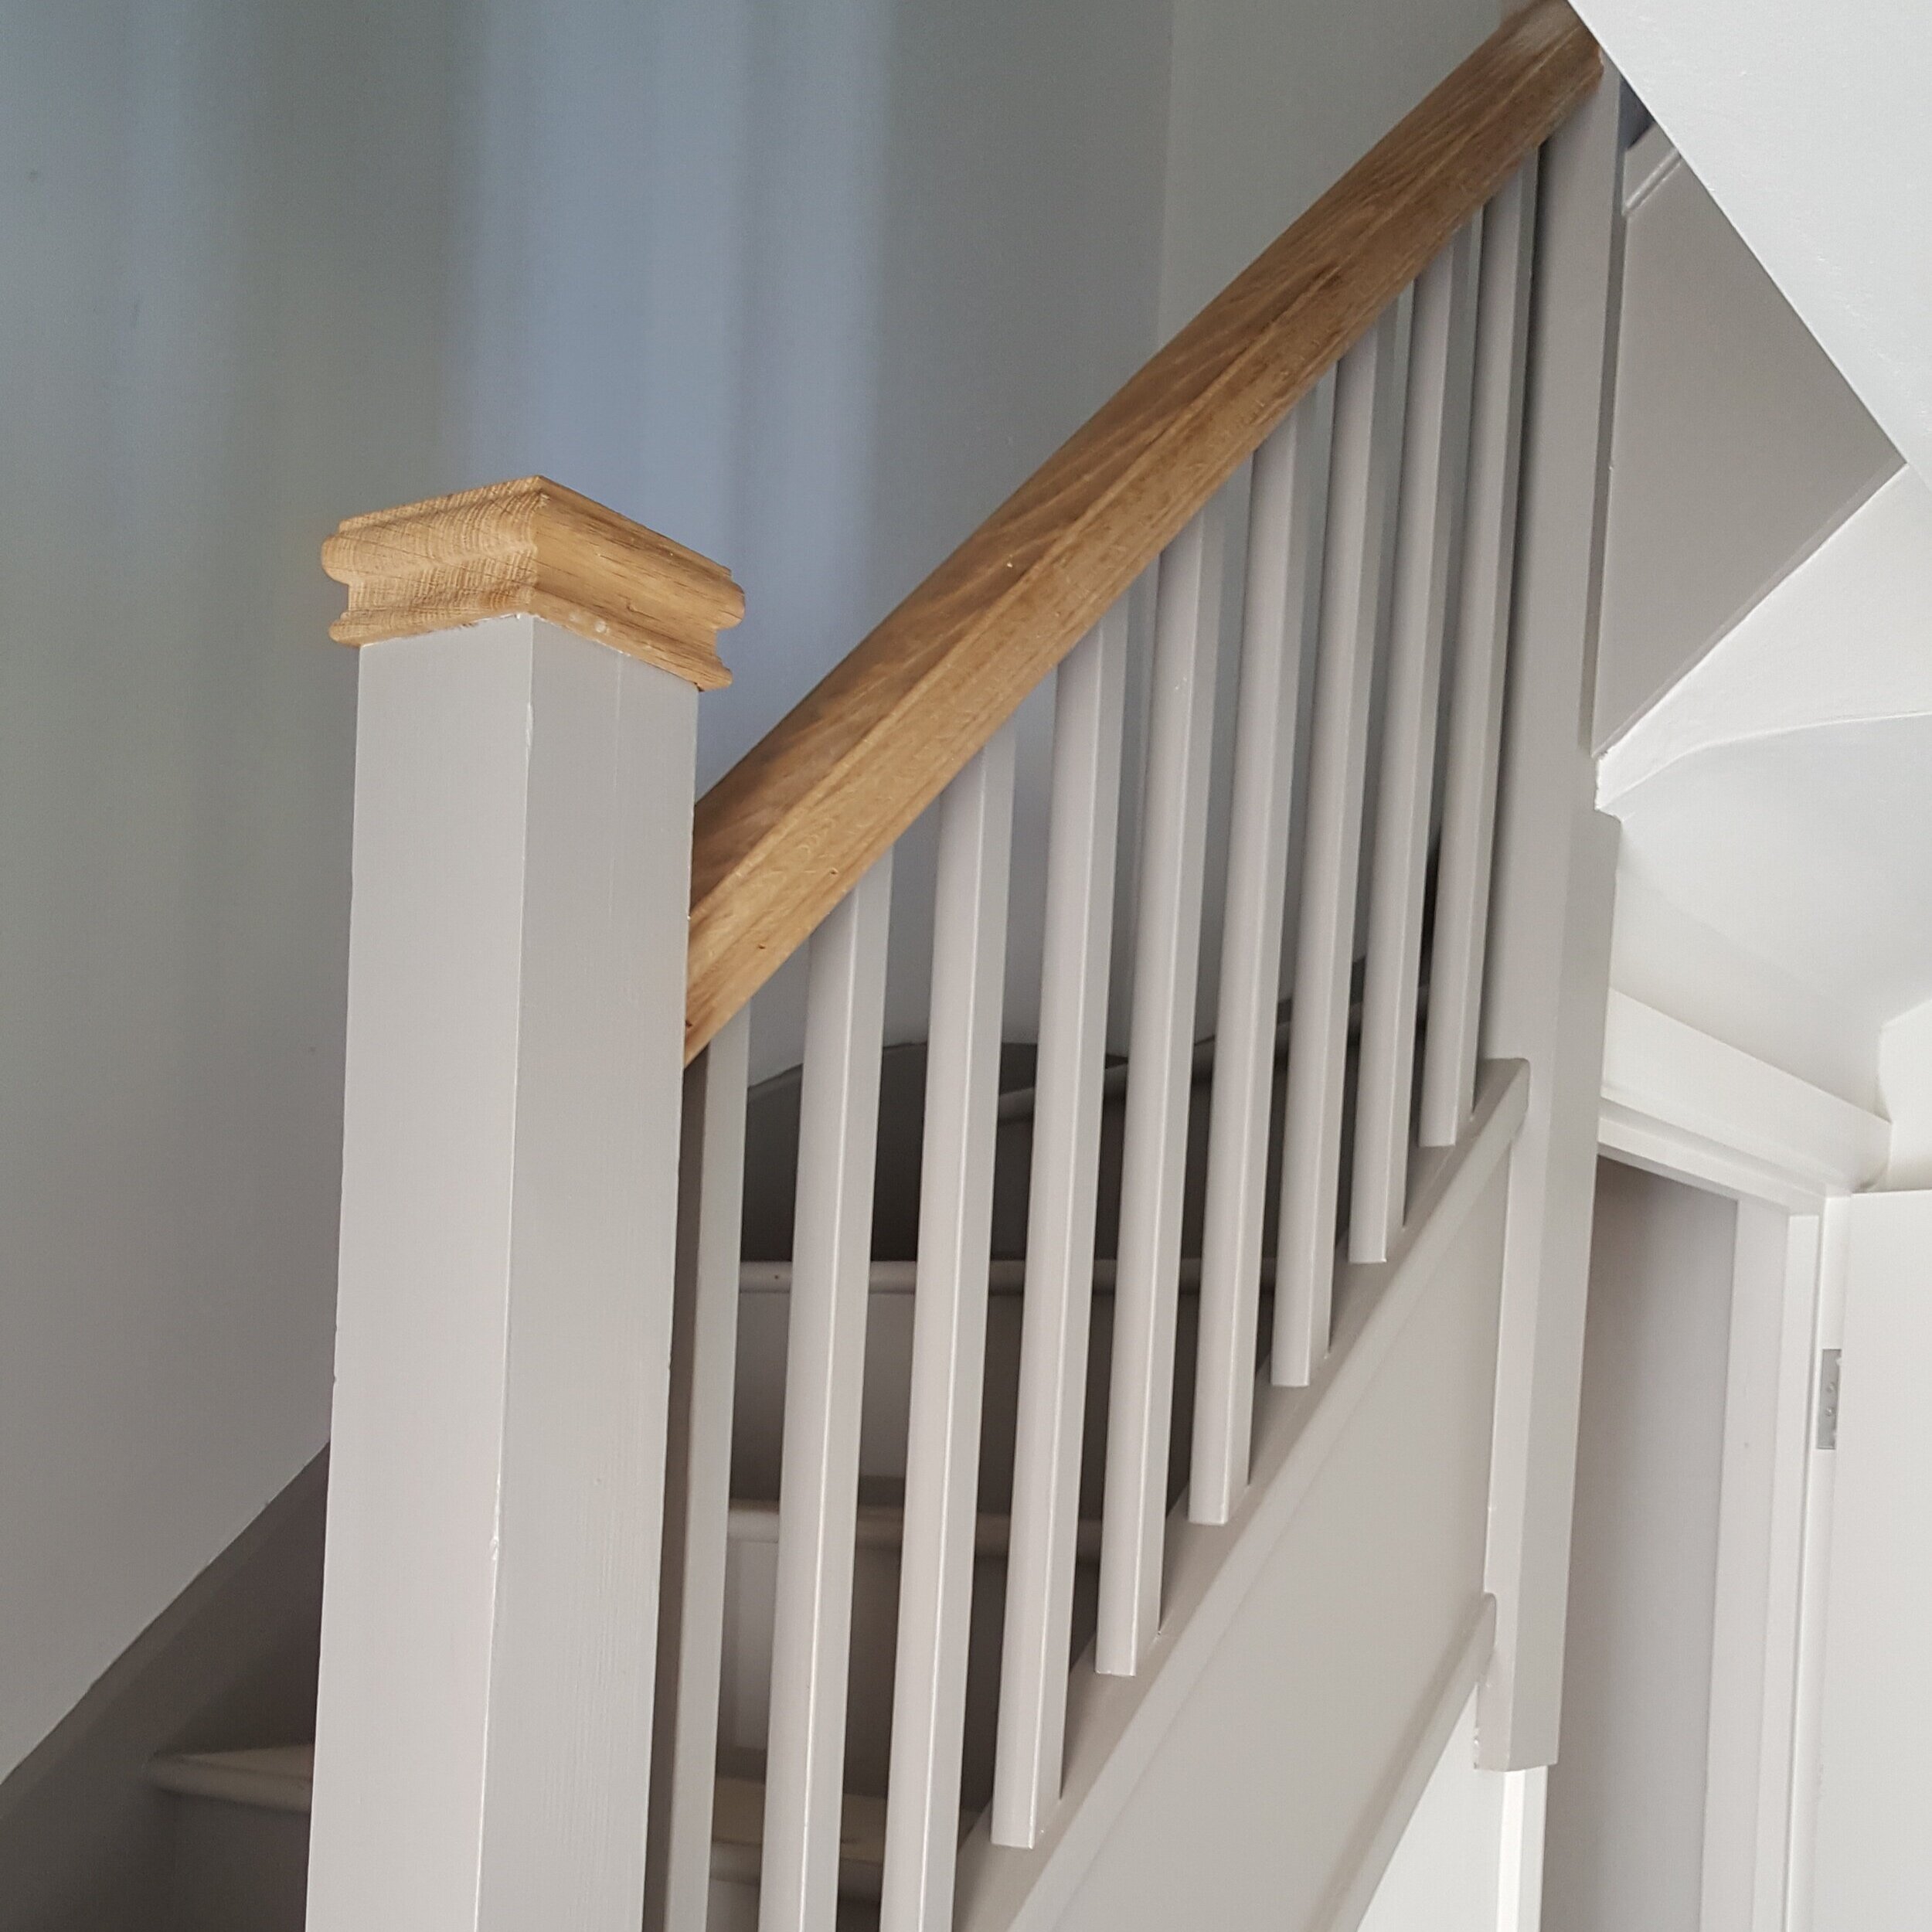 Wooden staircase made by locally based Castle House Joinery